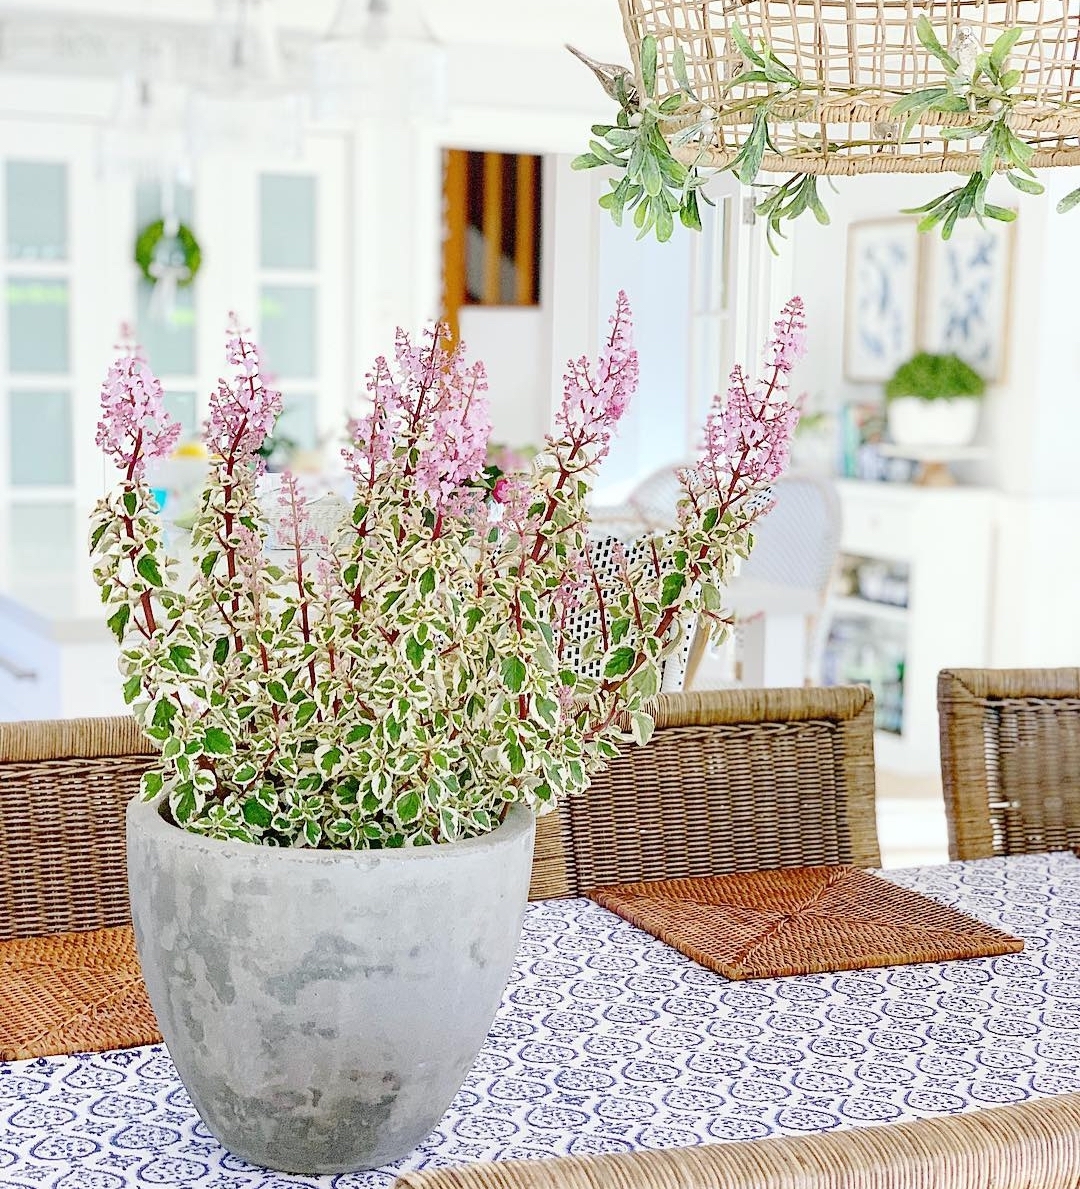 Potted colour on dining table